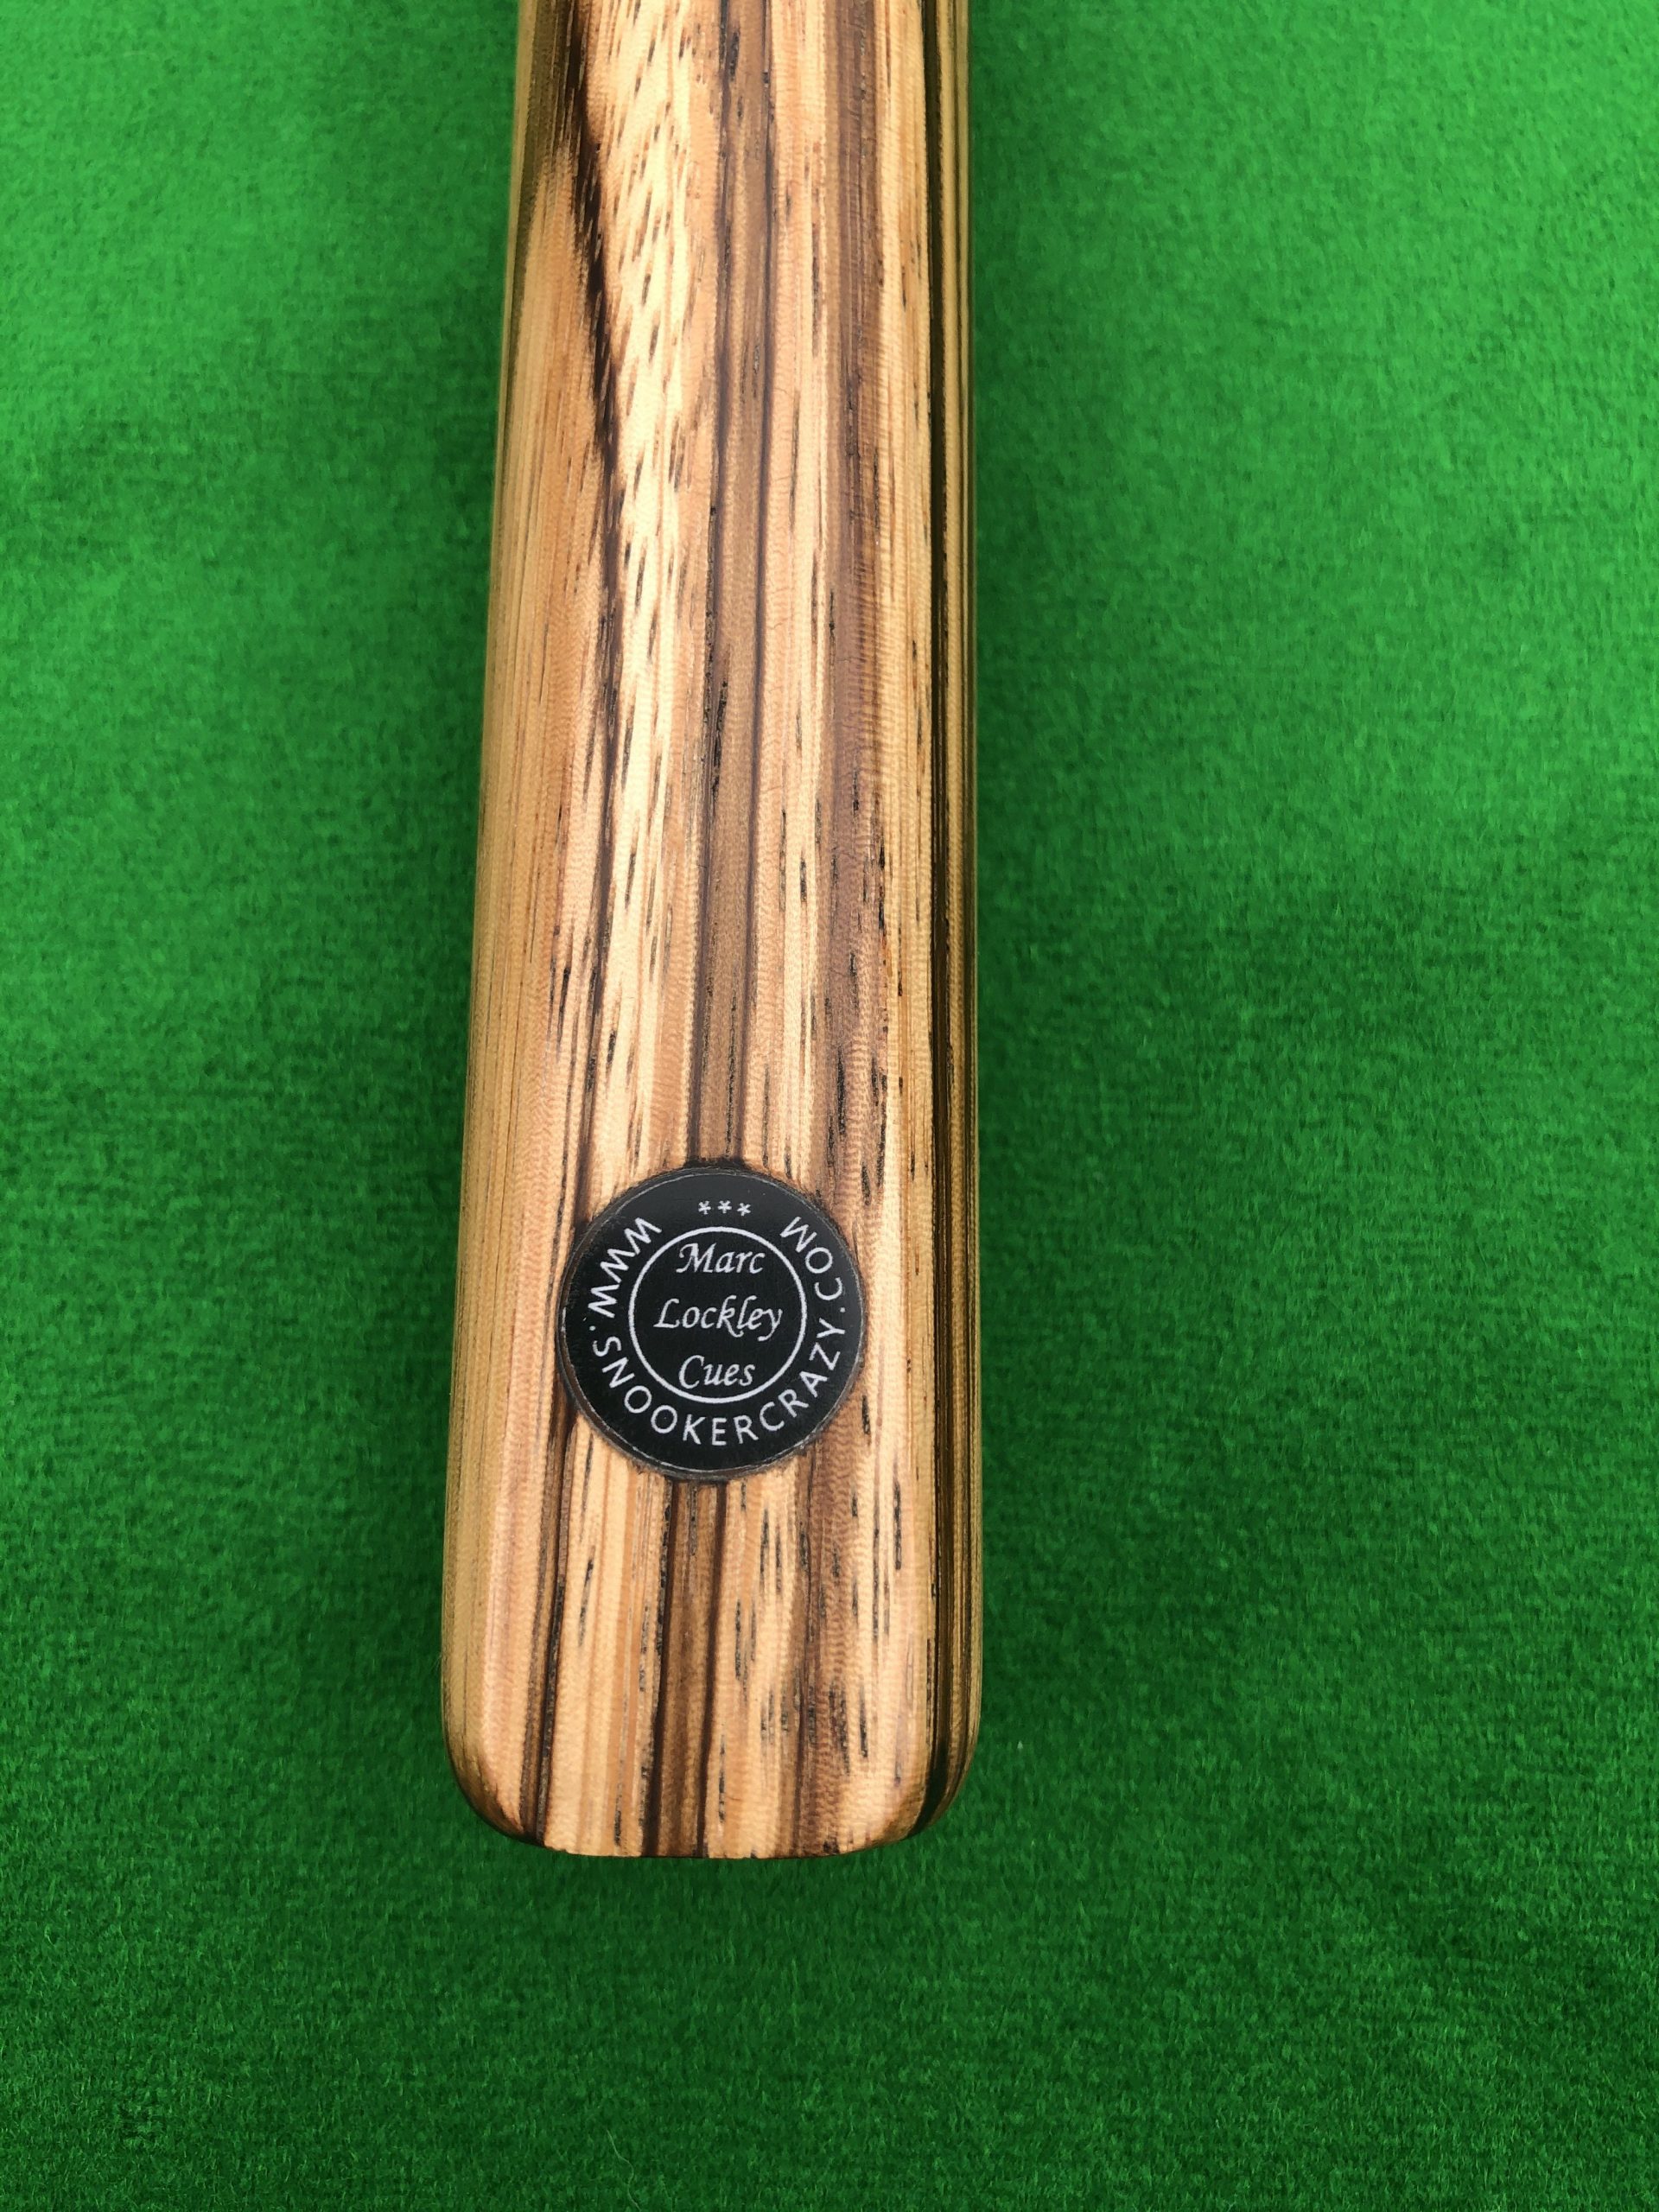 1 Piece Handmade Ebony Zebrawood Snooker Cue Set with White and Blue Case and Telescopic Extension